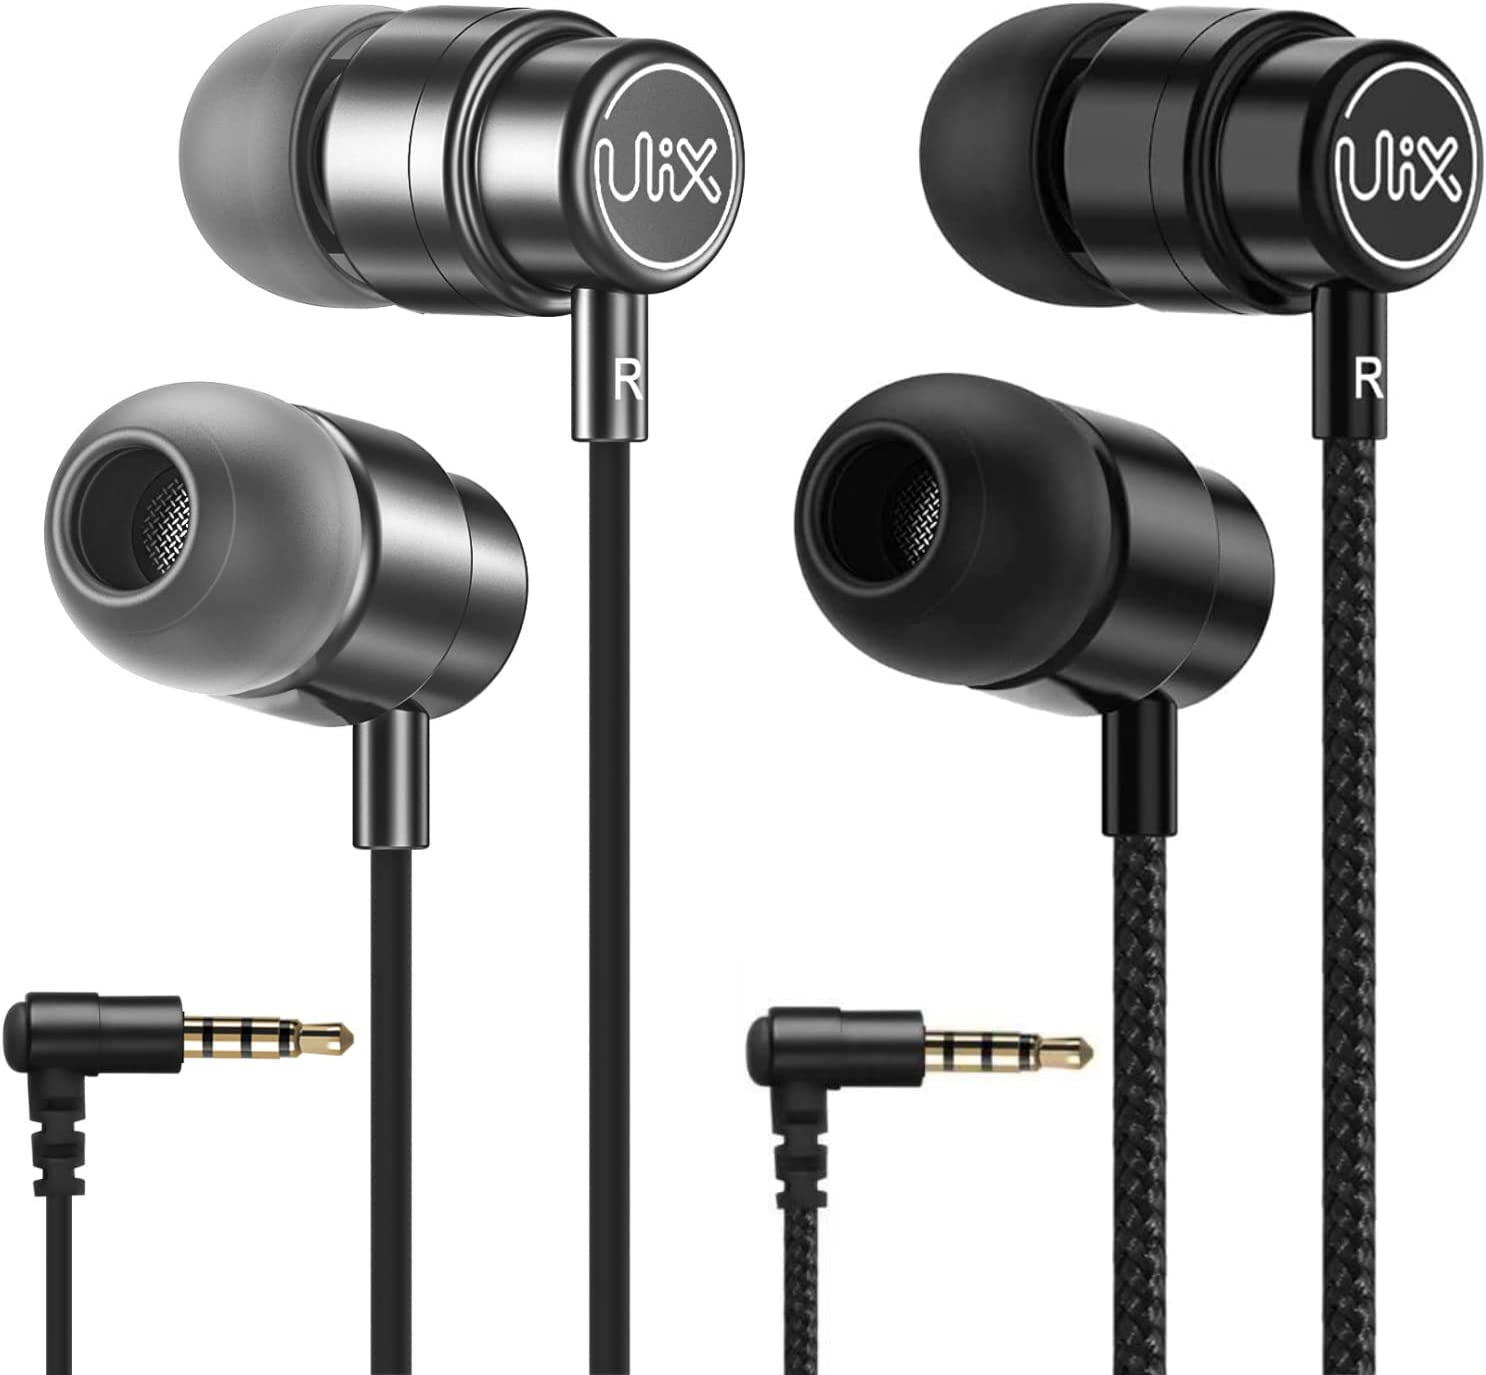 Wired Earbuds, Rider Grey and Black Earphones with Microphone, Comfortable and D